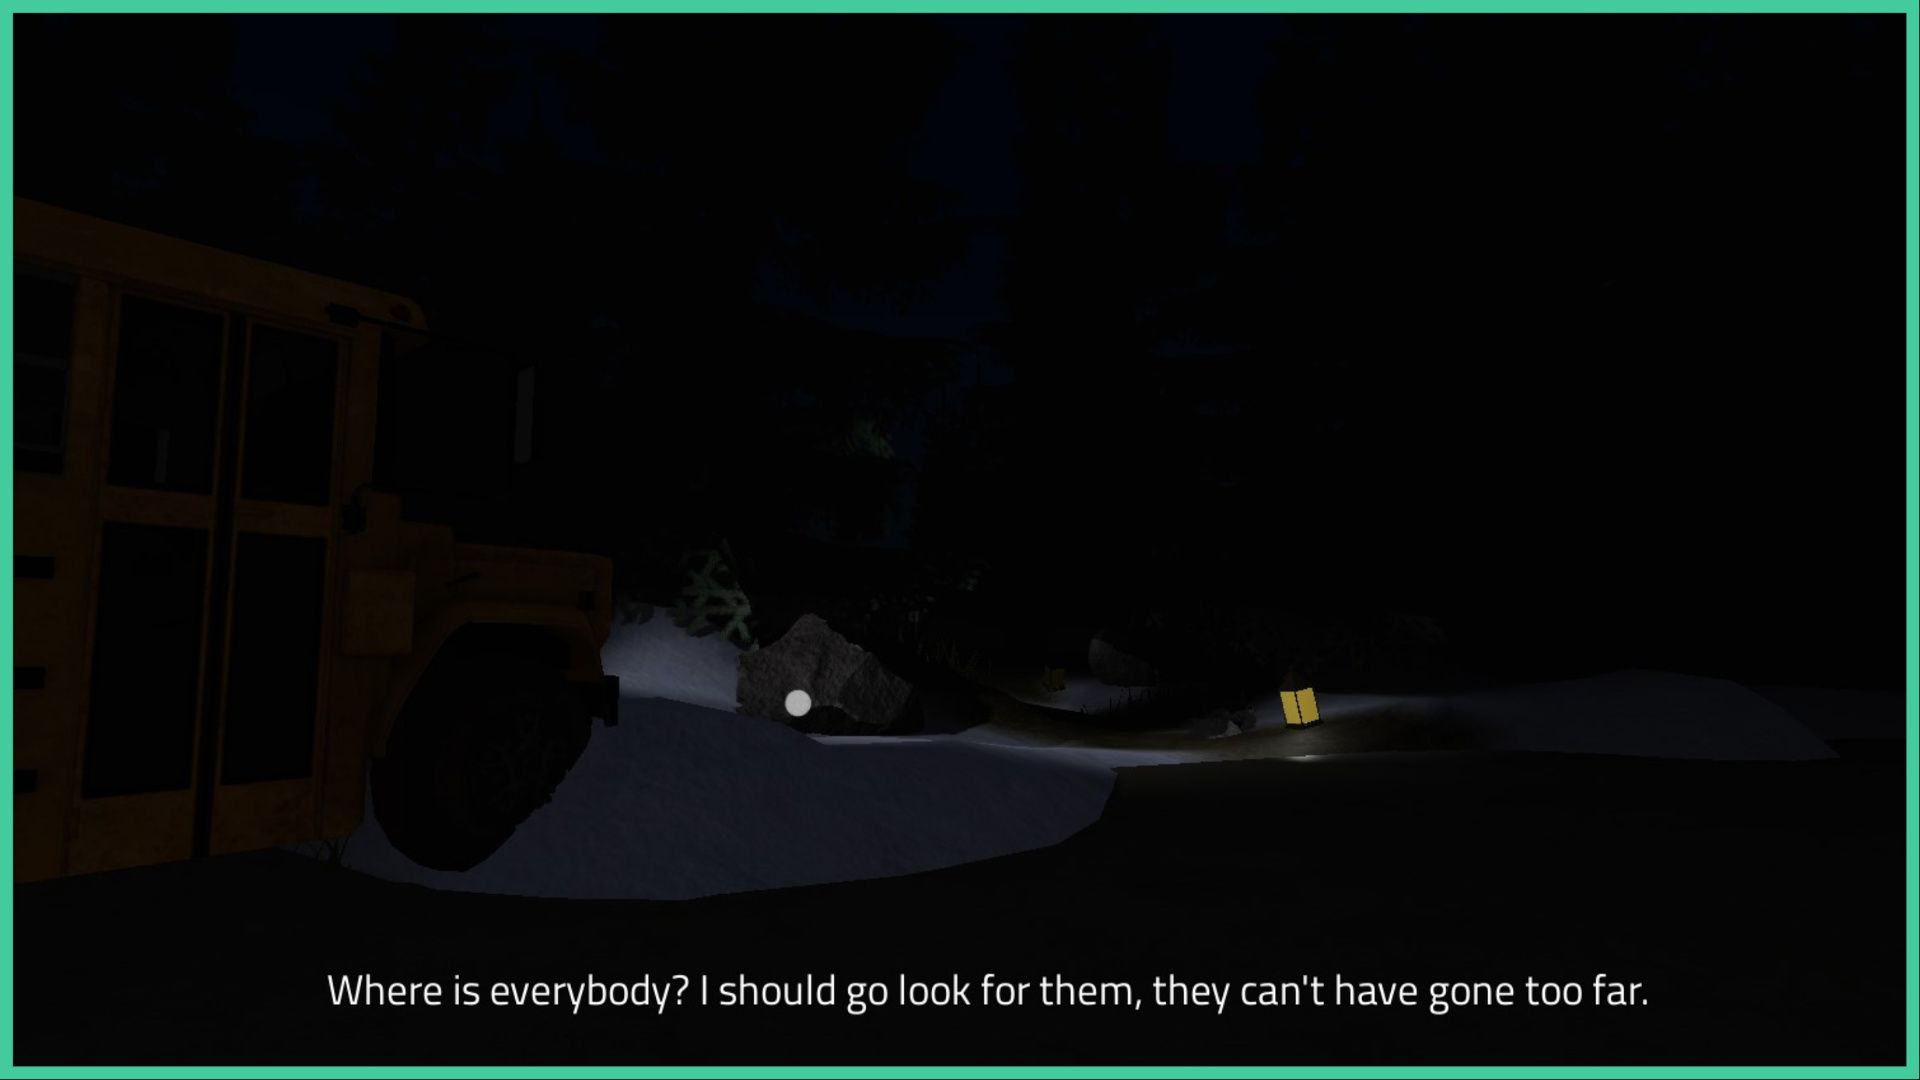 feature image for our roblox elmira maze guide, the image features a screenshot from the start of the game of an abandoned school bus surrounded by snow and darkness, there is a lantern on the ground ahead that is lighting up the road slightly, there is dialogue at the bottom of the screen that reads 'where is everybody? i should go look for them, they can't have gone too far'